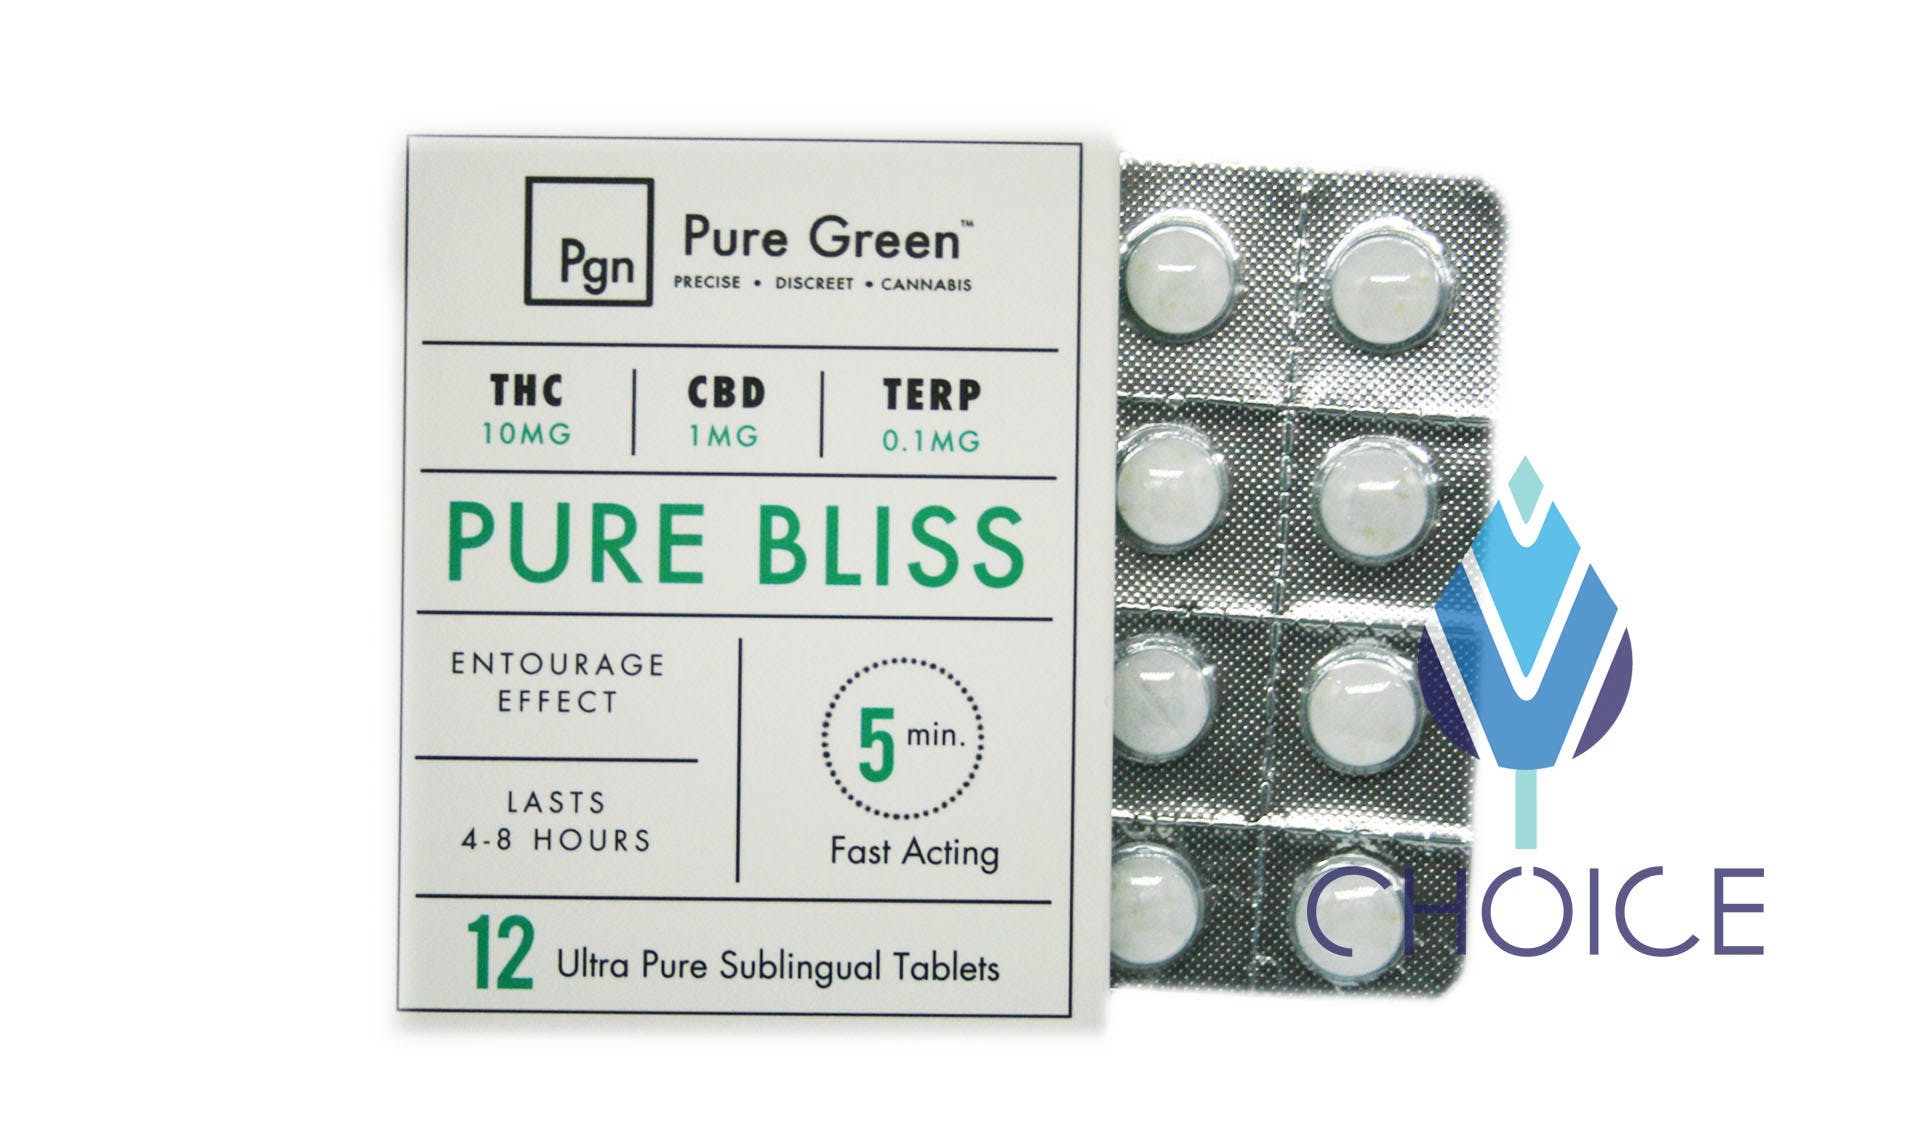 edible-12-pk-pure-bliss-cbdthc-tablets-by-pure-green